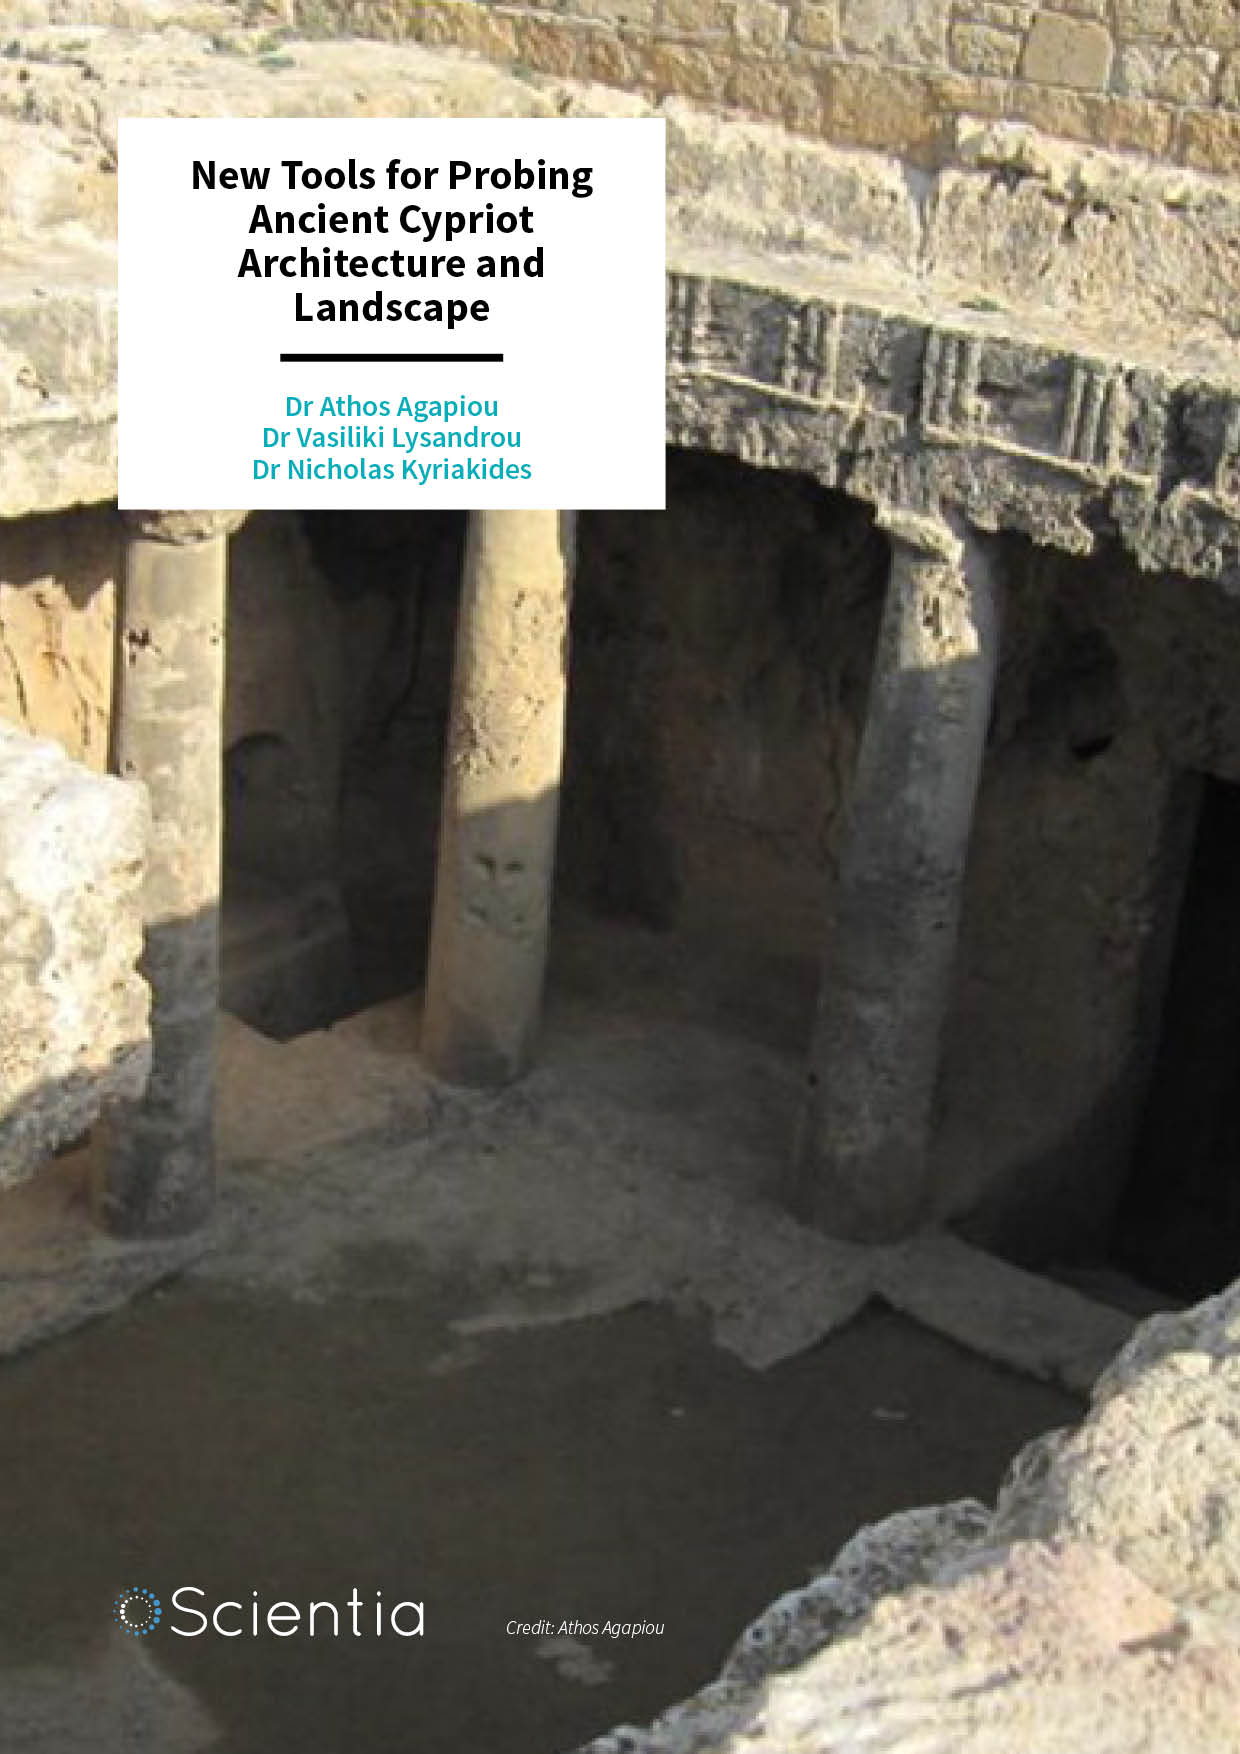 Dr Athos Agapiou | Dr Vasiliki Lysandrou | Dr Nicholas Kyriakides – New Tools for Probing Ancient Cypriot Architecture and Landscape